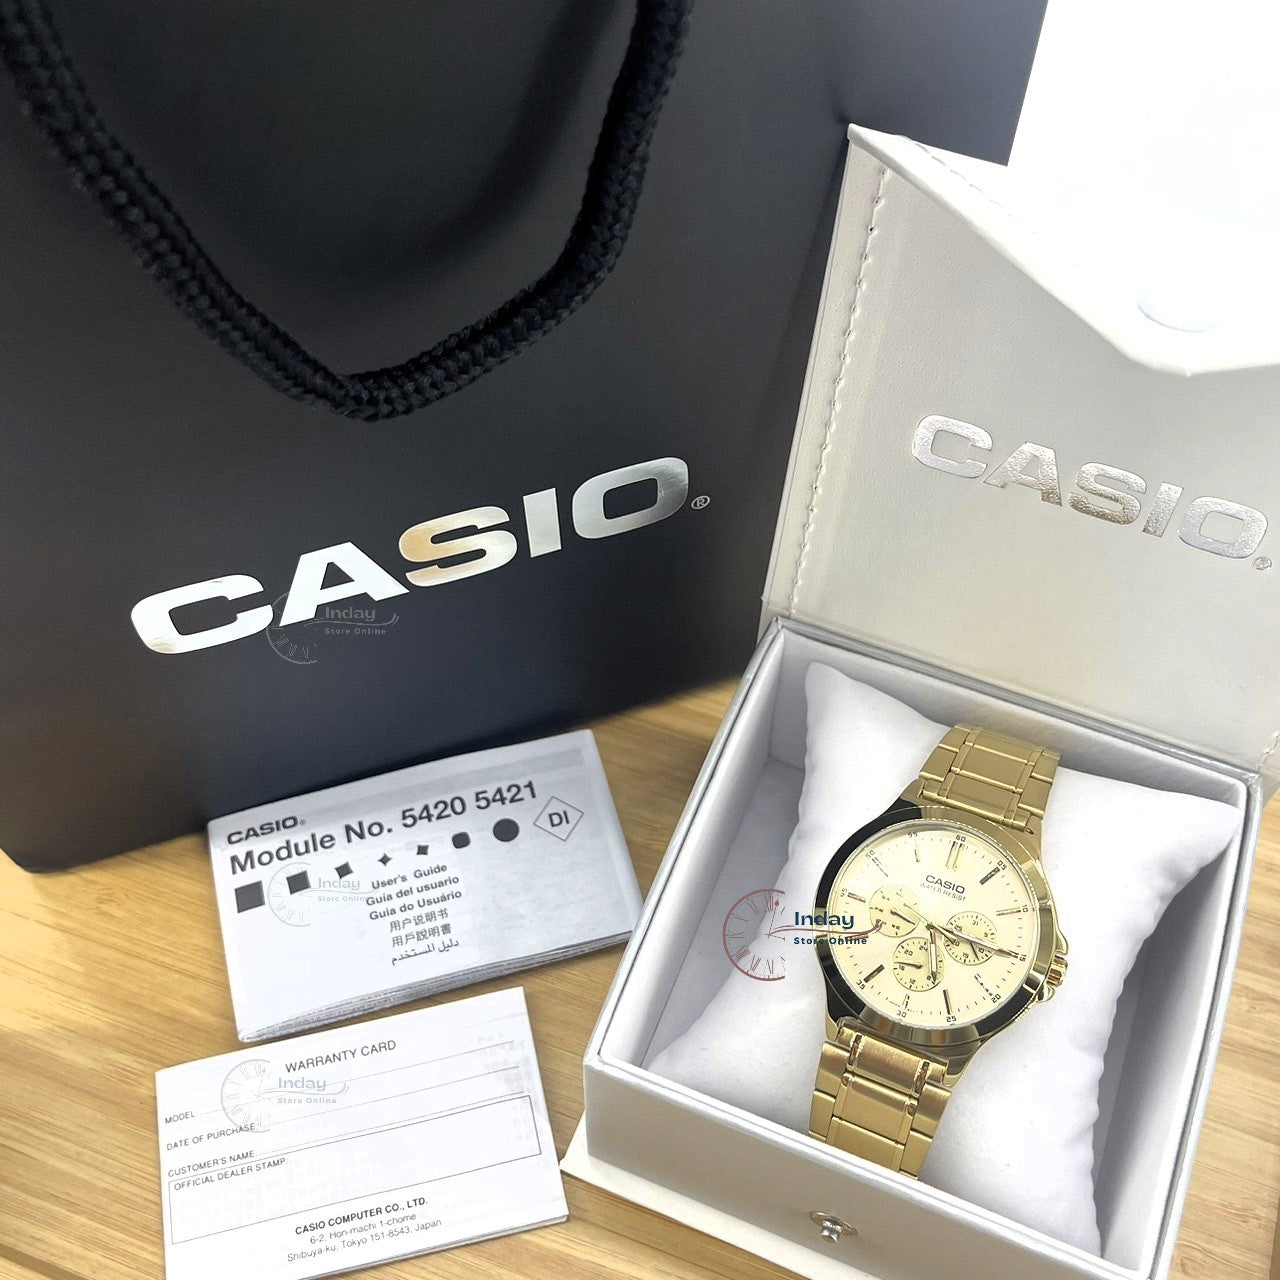 Casio Standard Men's Watch MTP-V300G-9A Gold Plated Stainless Steel Mineral Glass